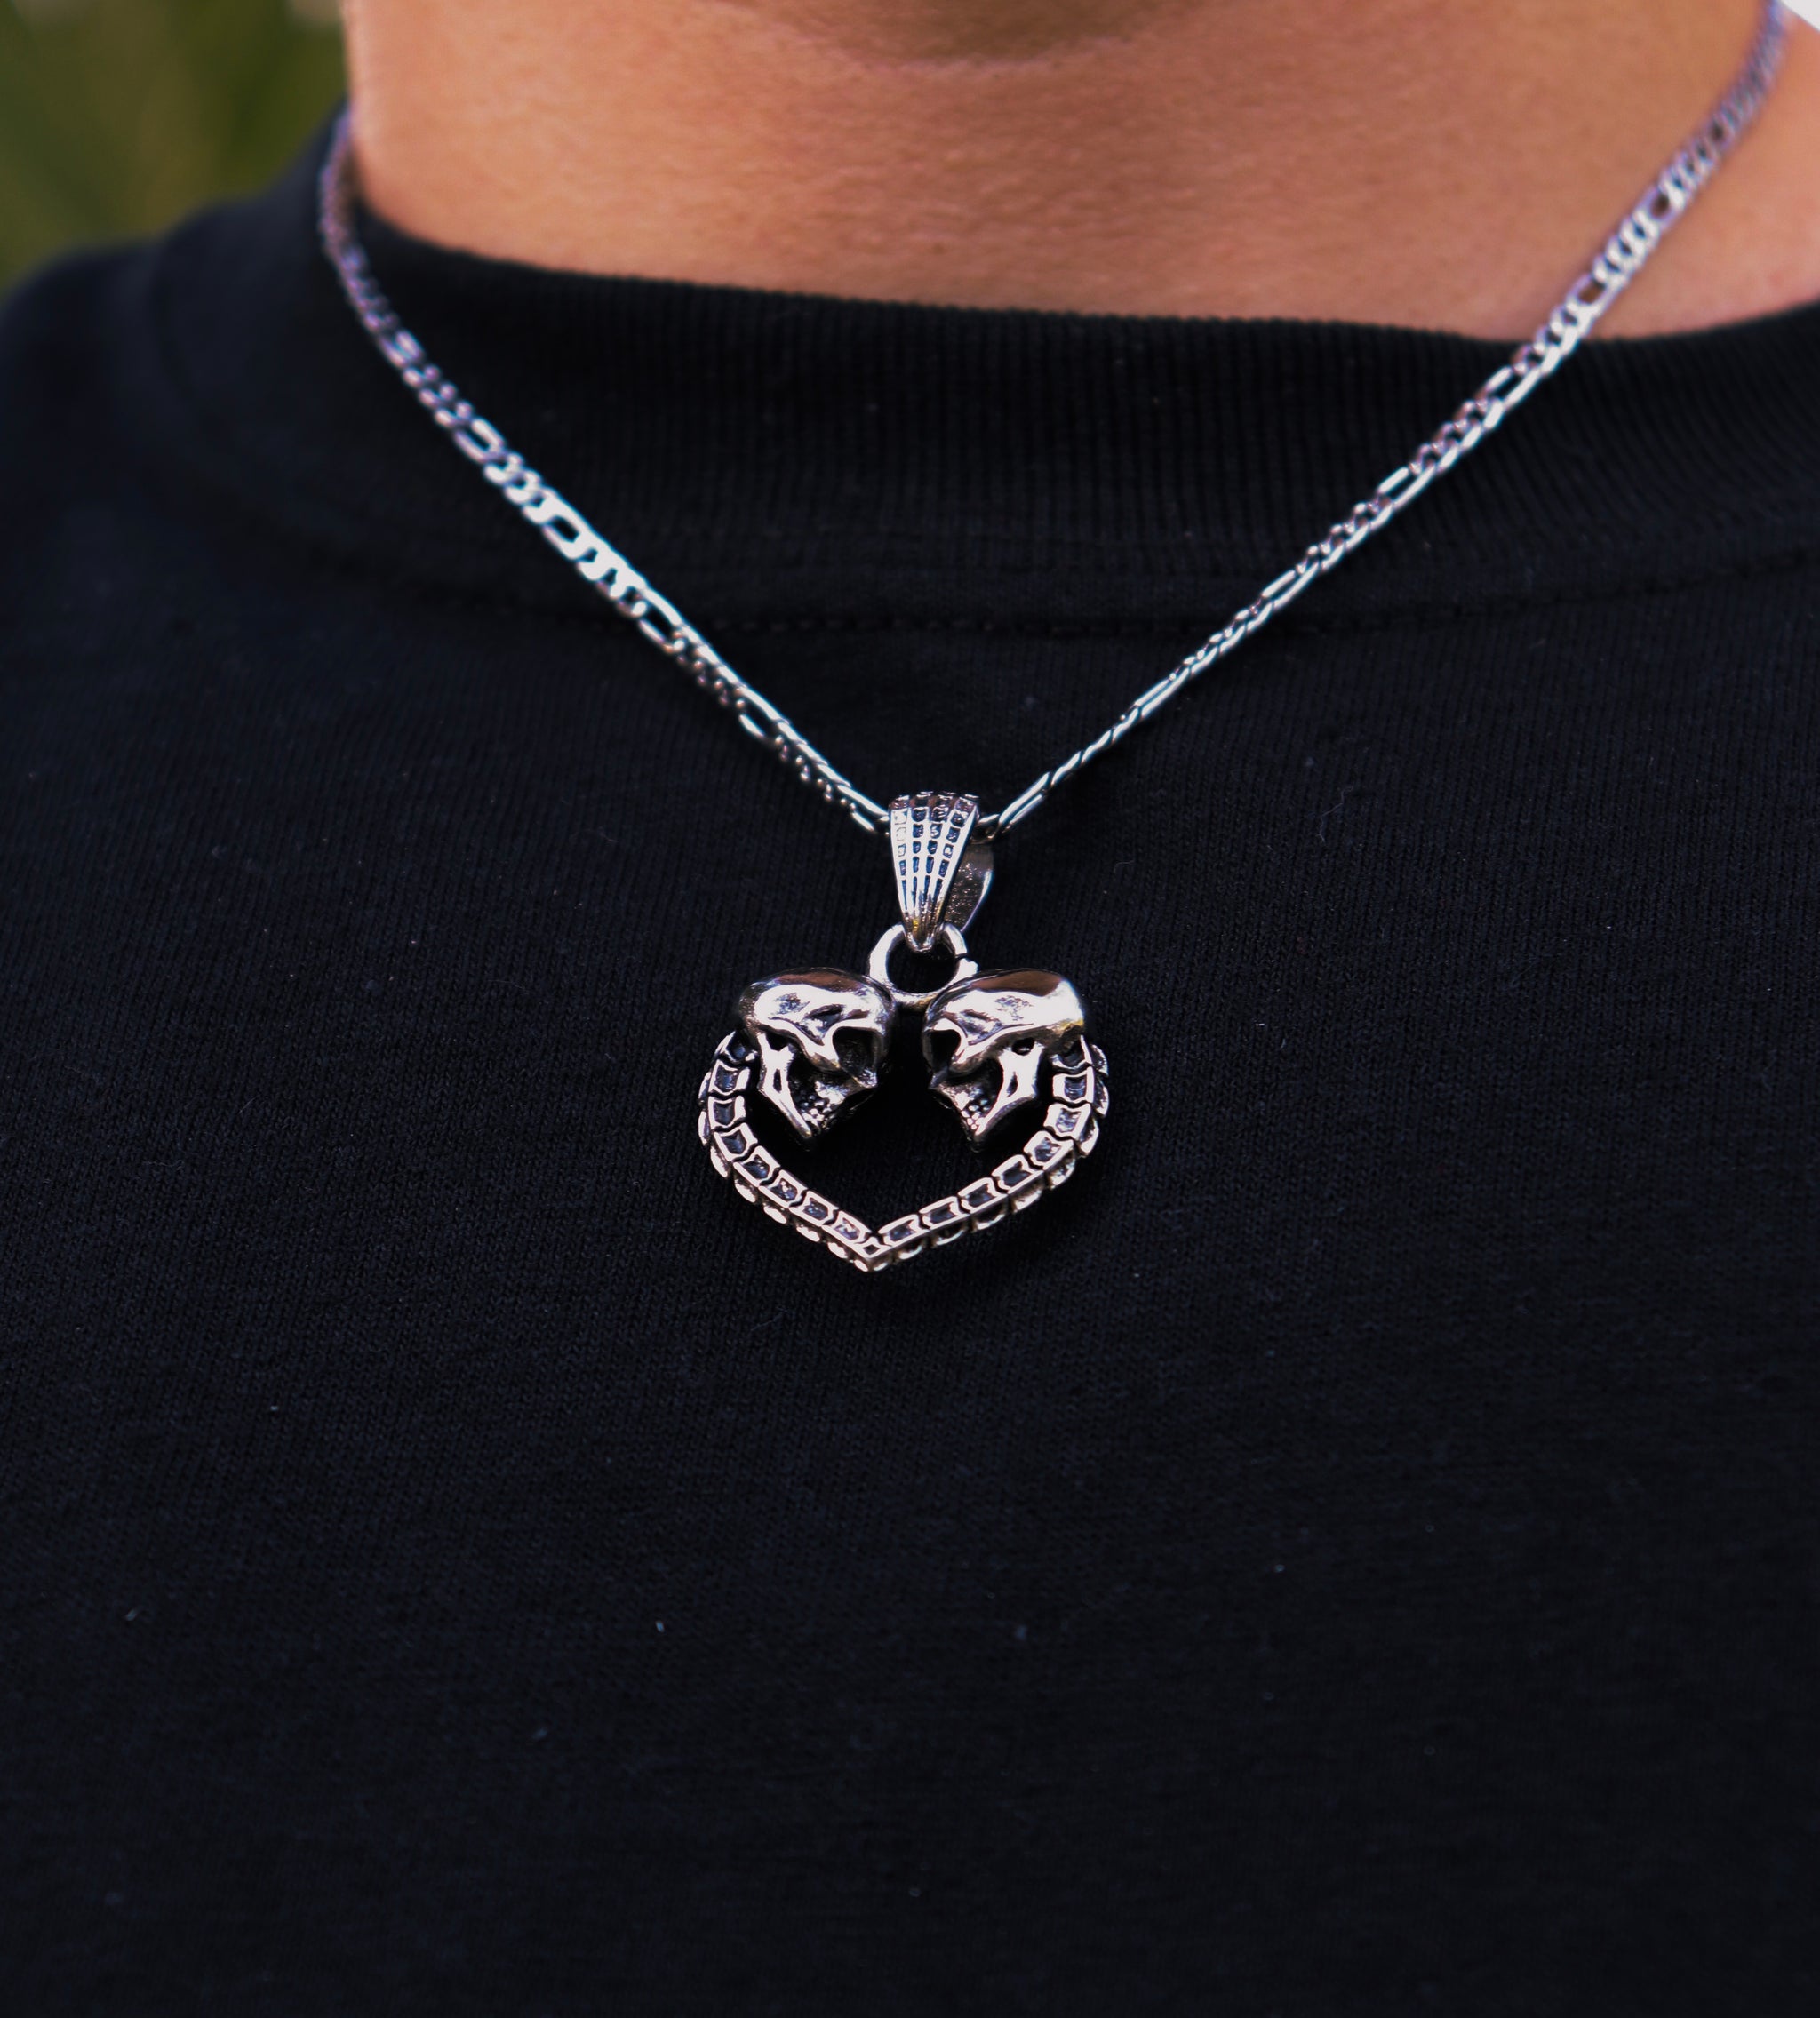 Silver Forbidden Love Necklace - Fashion Jewelry by Yordy.